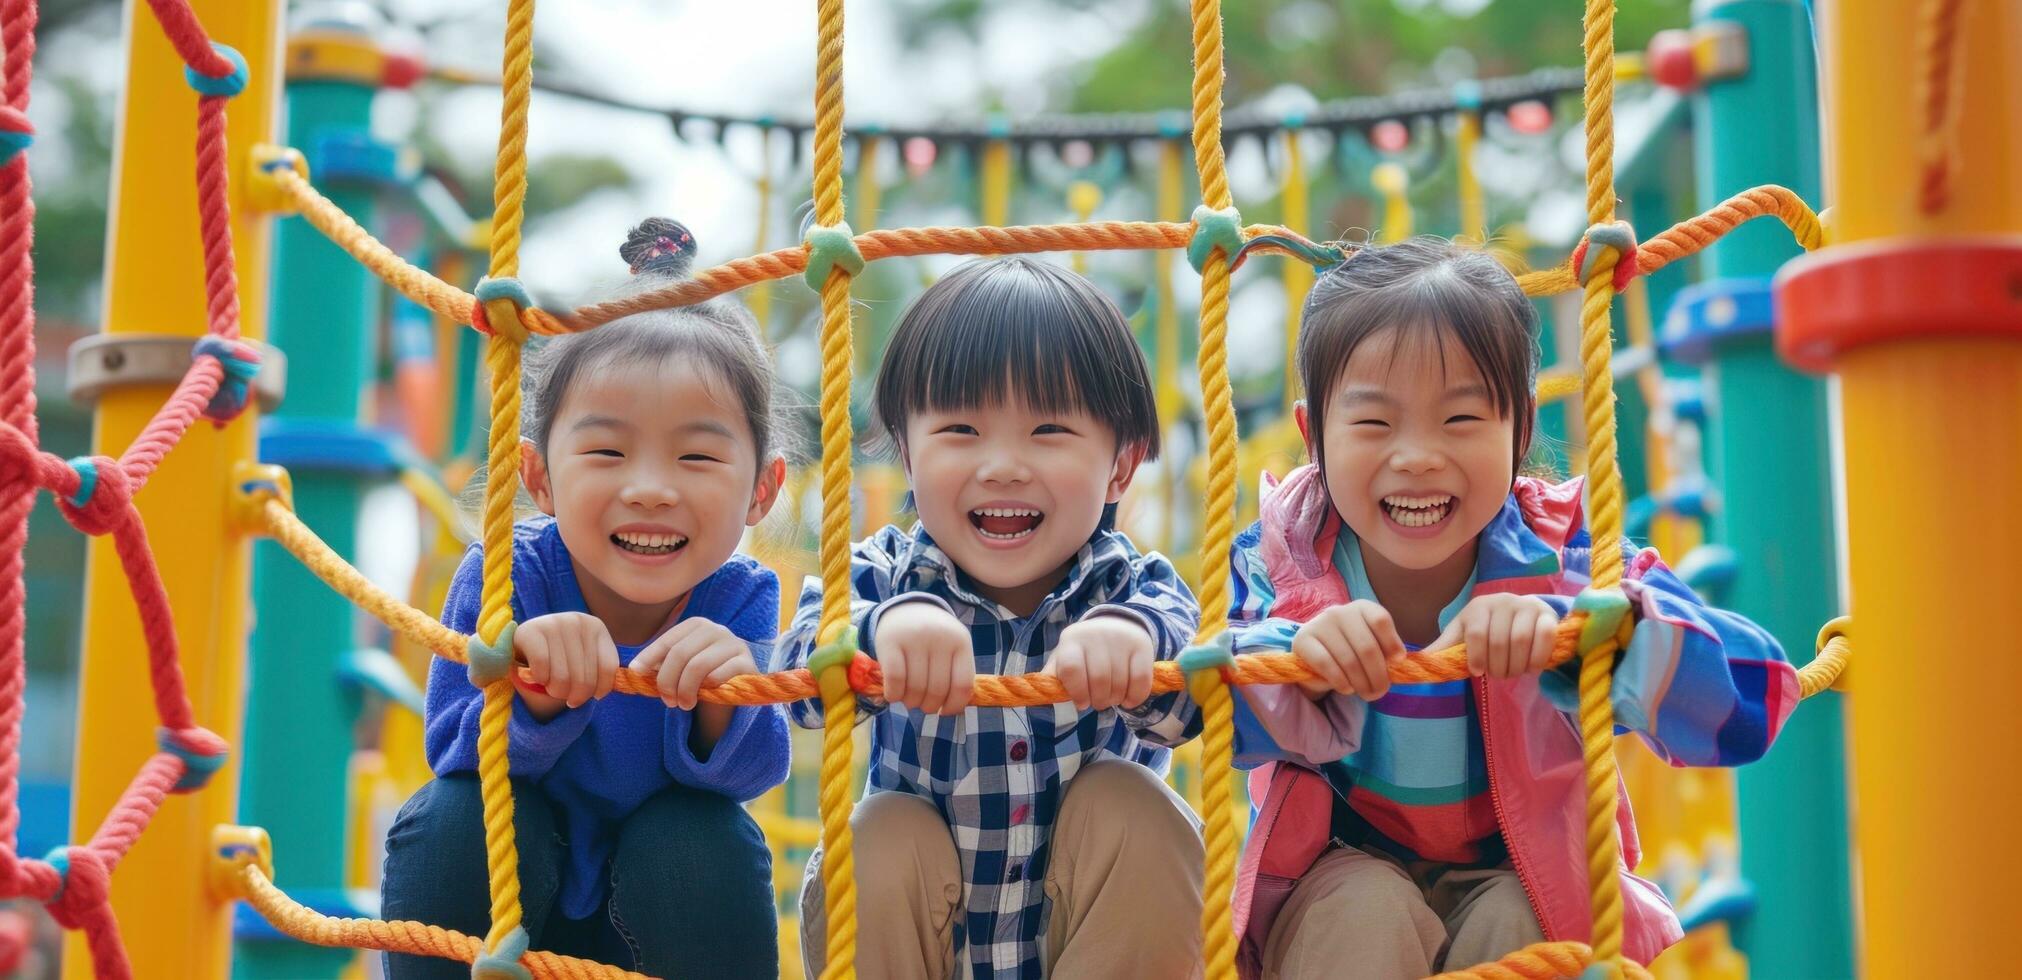 AI generated children holding up colorful rope in children play center photo